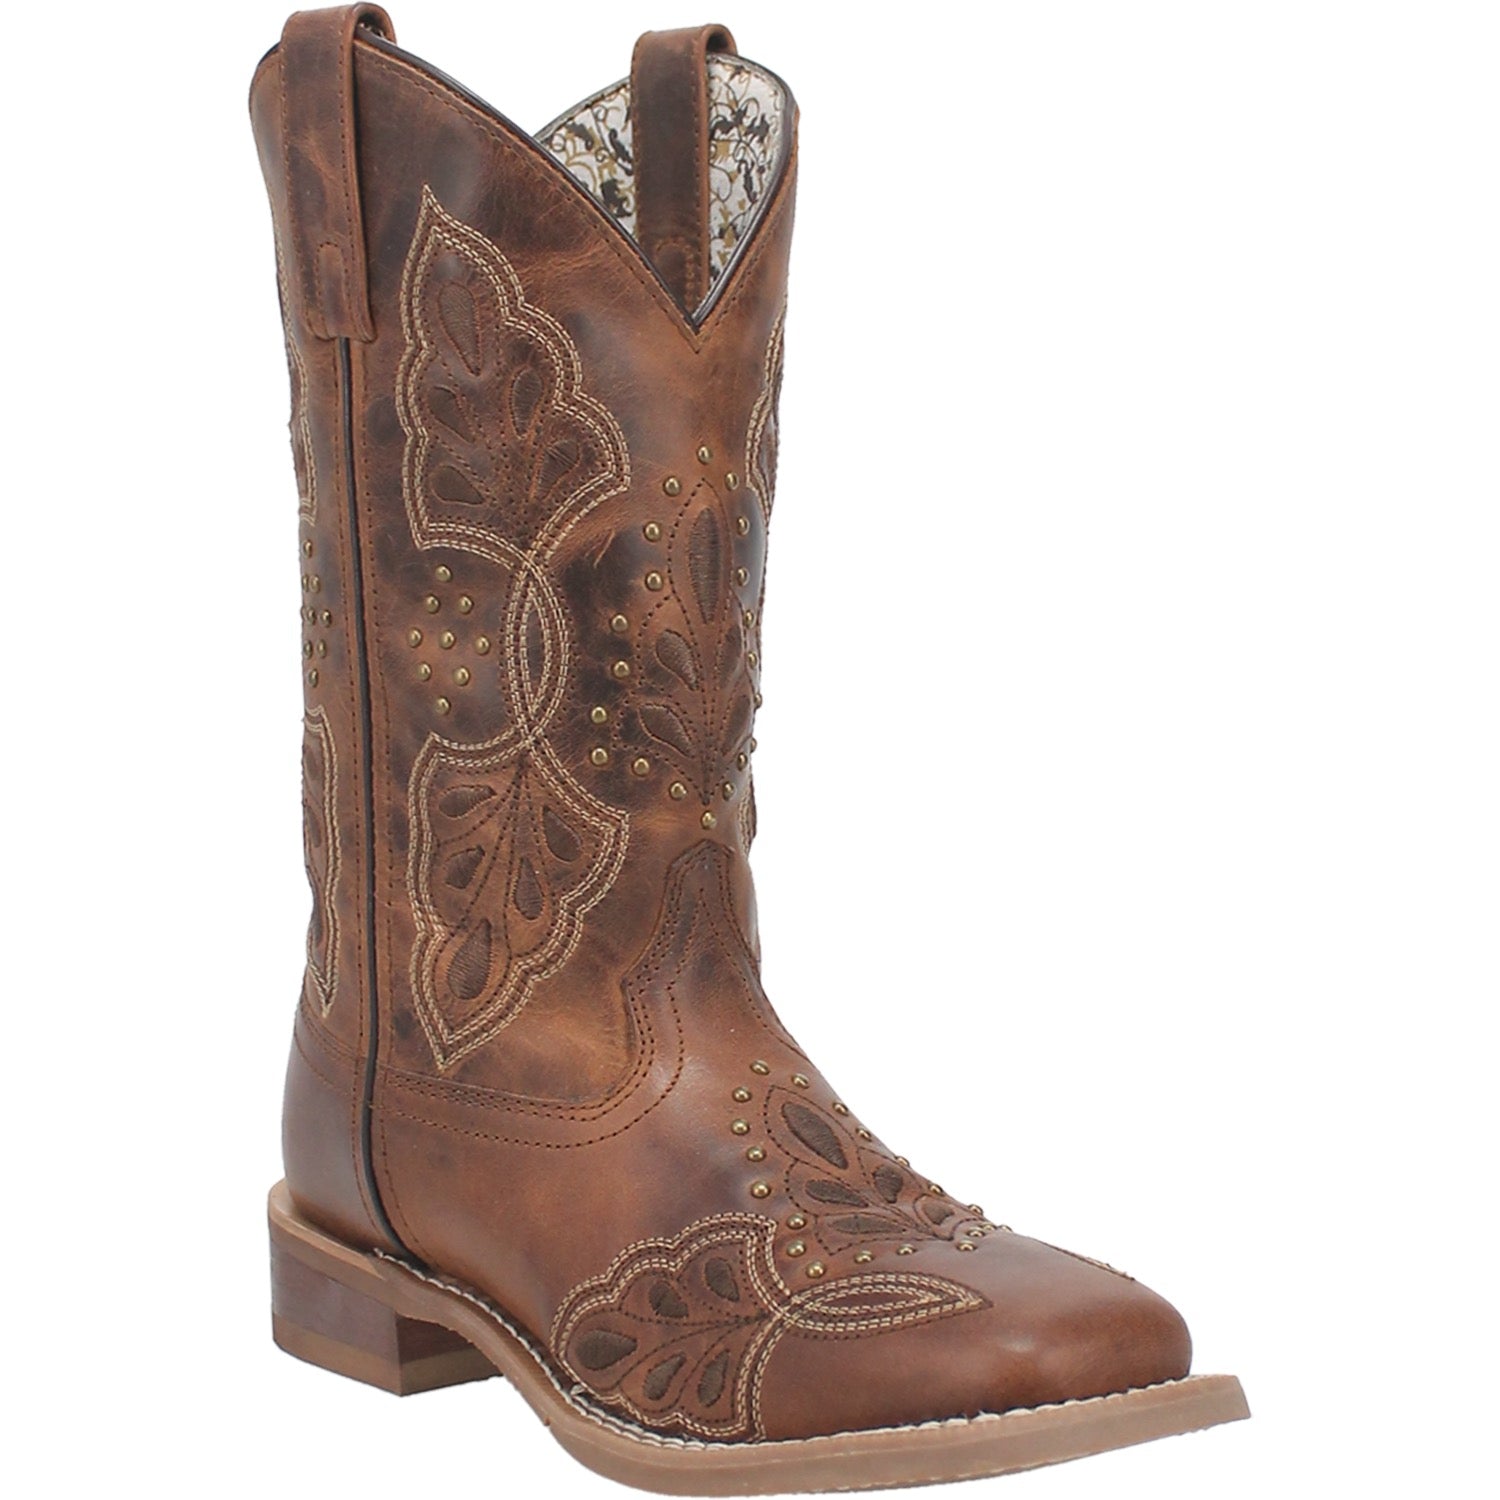 DIONNE LEATHER BOOT Cover